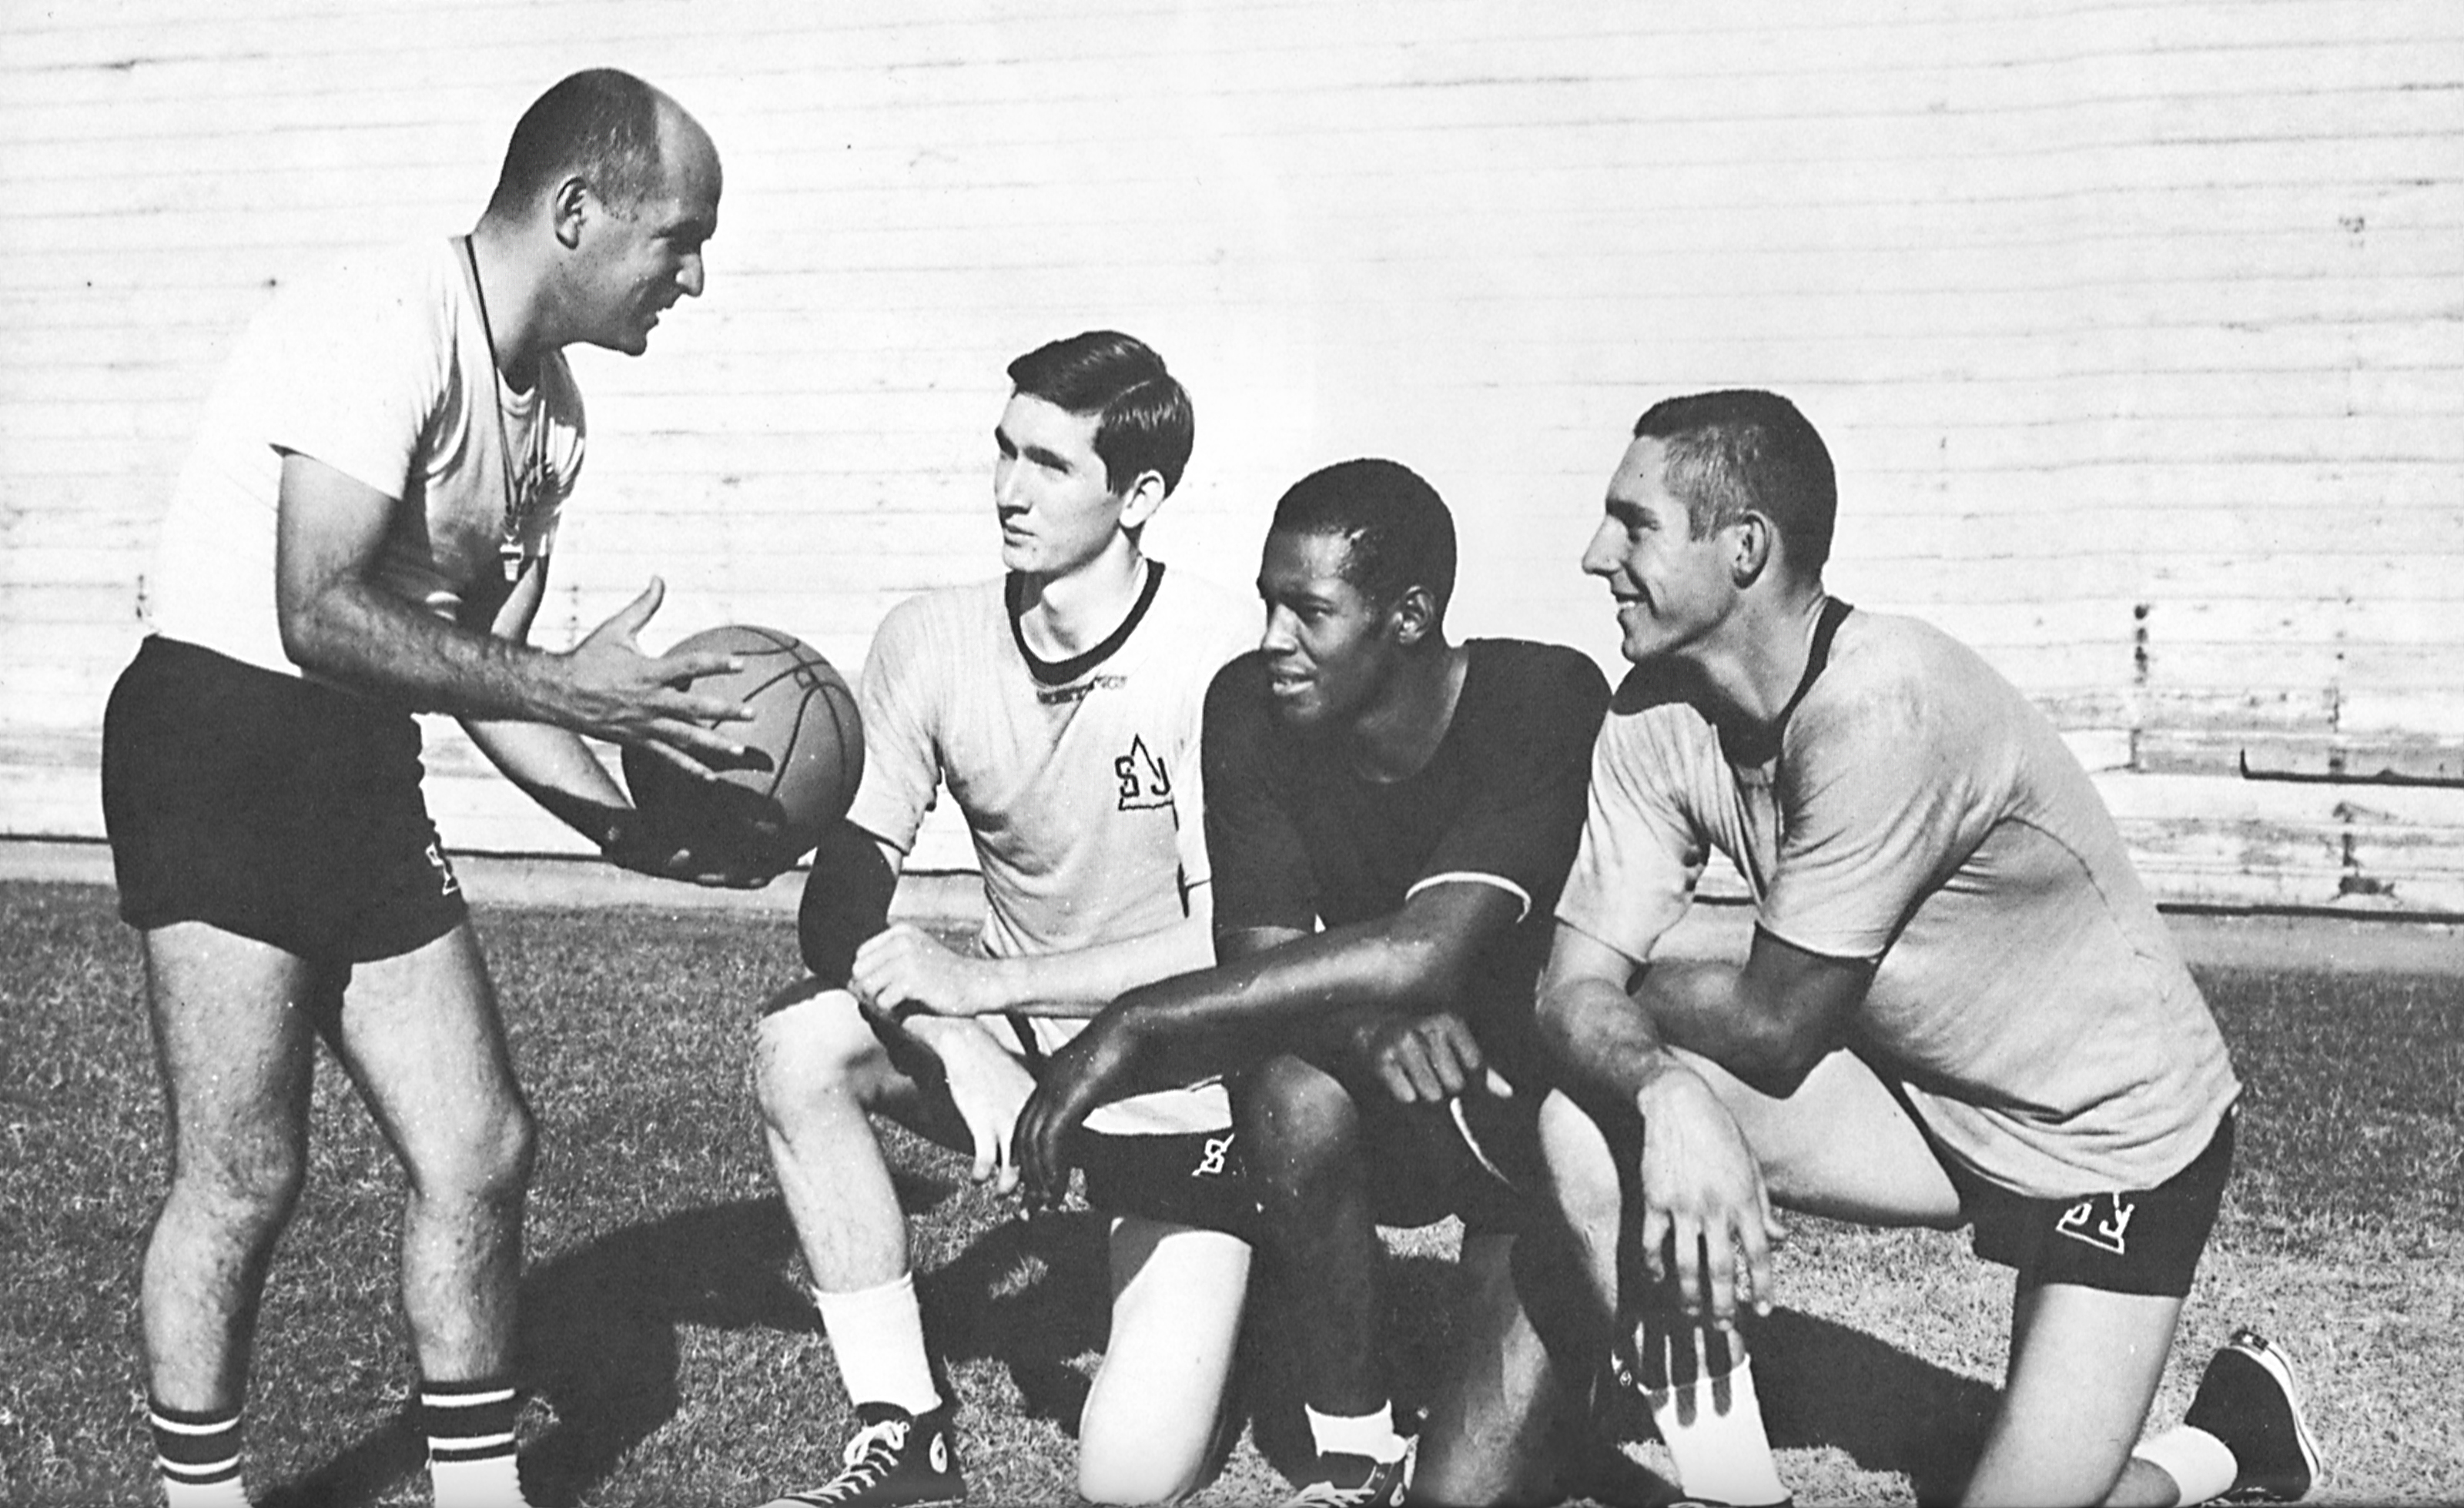 Ernie Marcopulos, left, coaching Delta basketball players in 1965